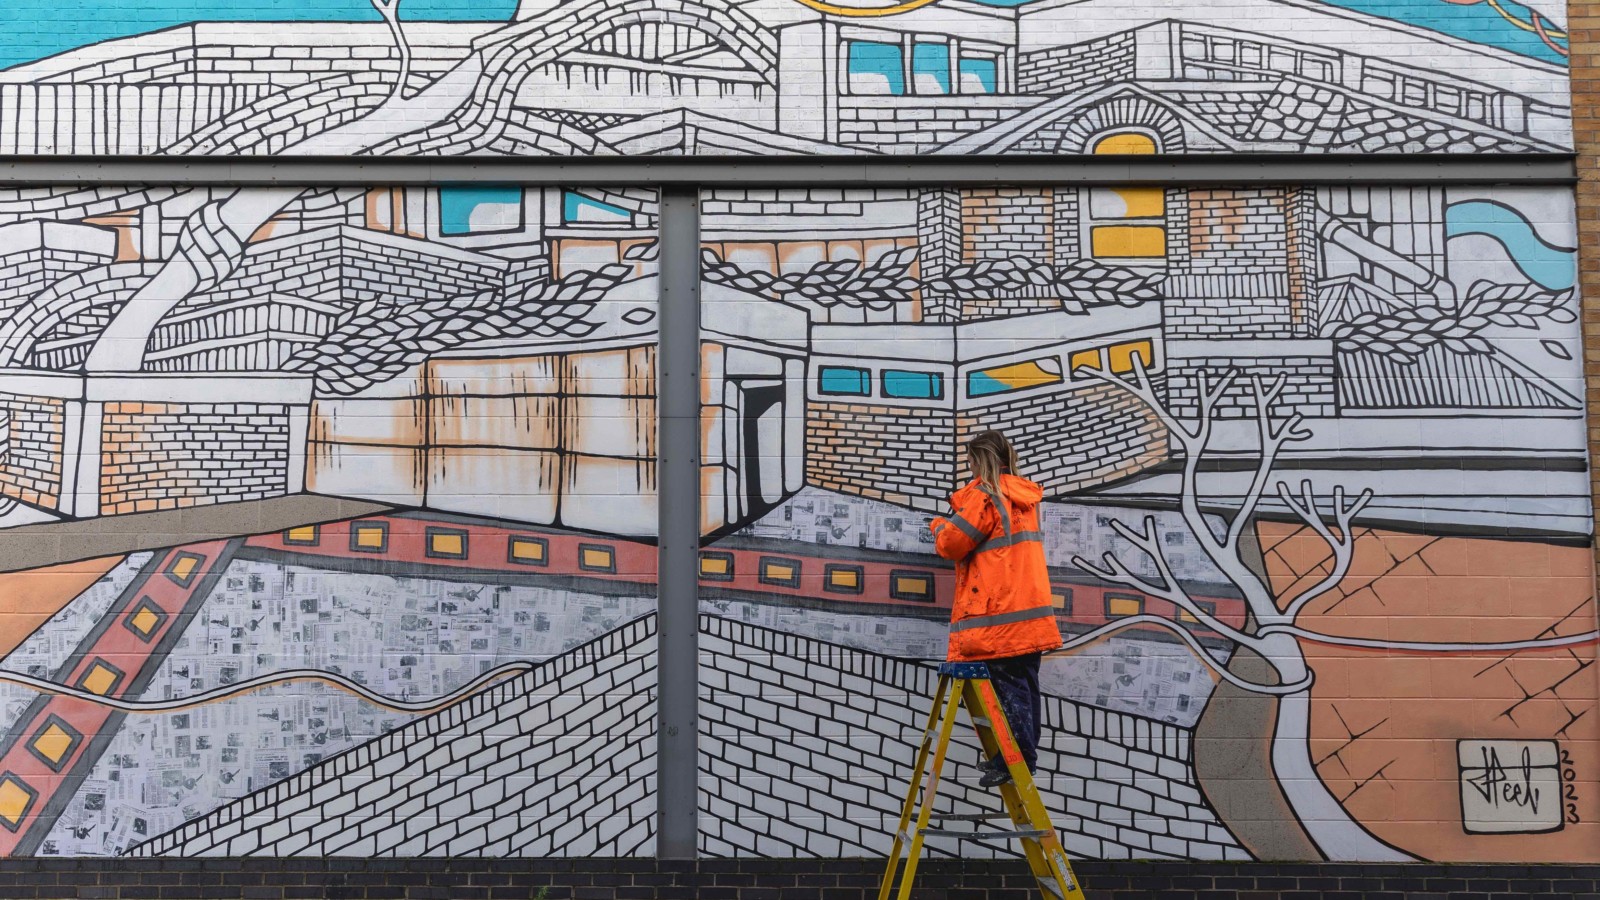 Jo Peel is photographed from behind wearing an orange High Vis jacket, stood on a ladder, painting the mural.